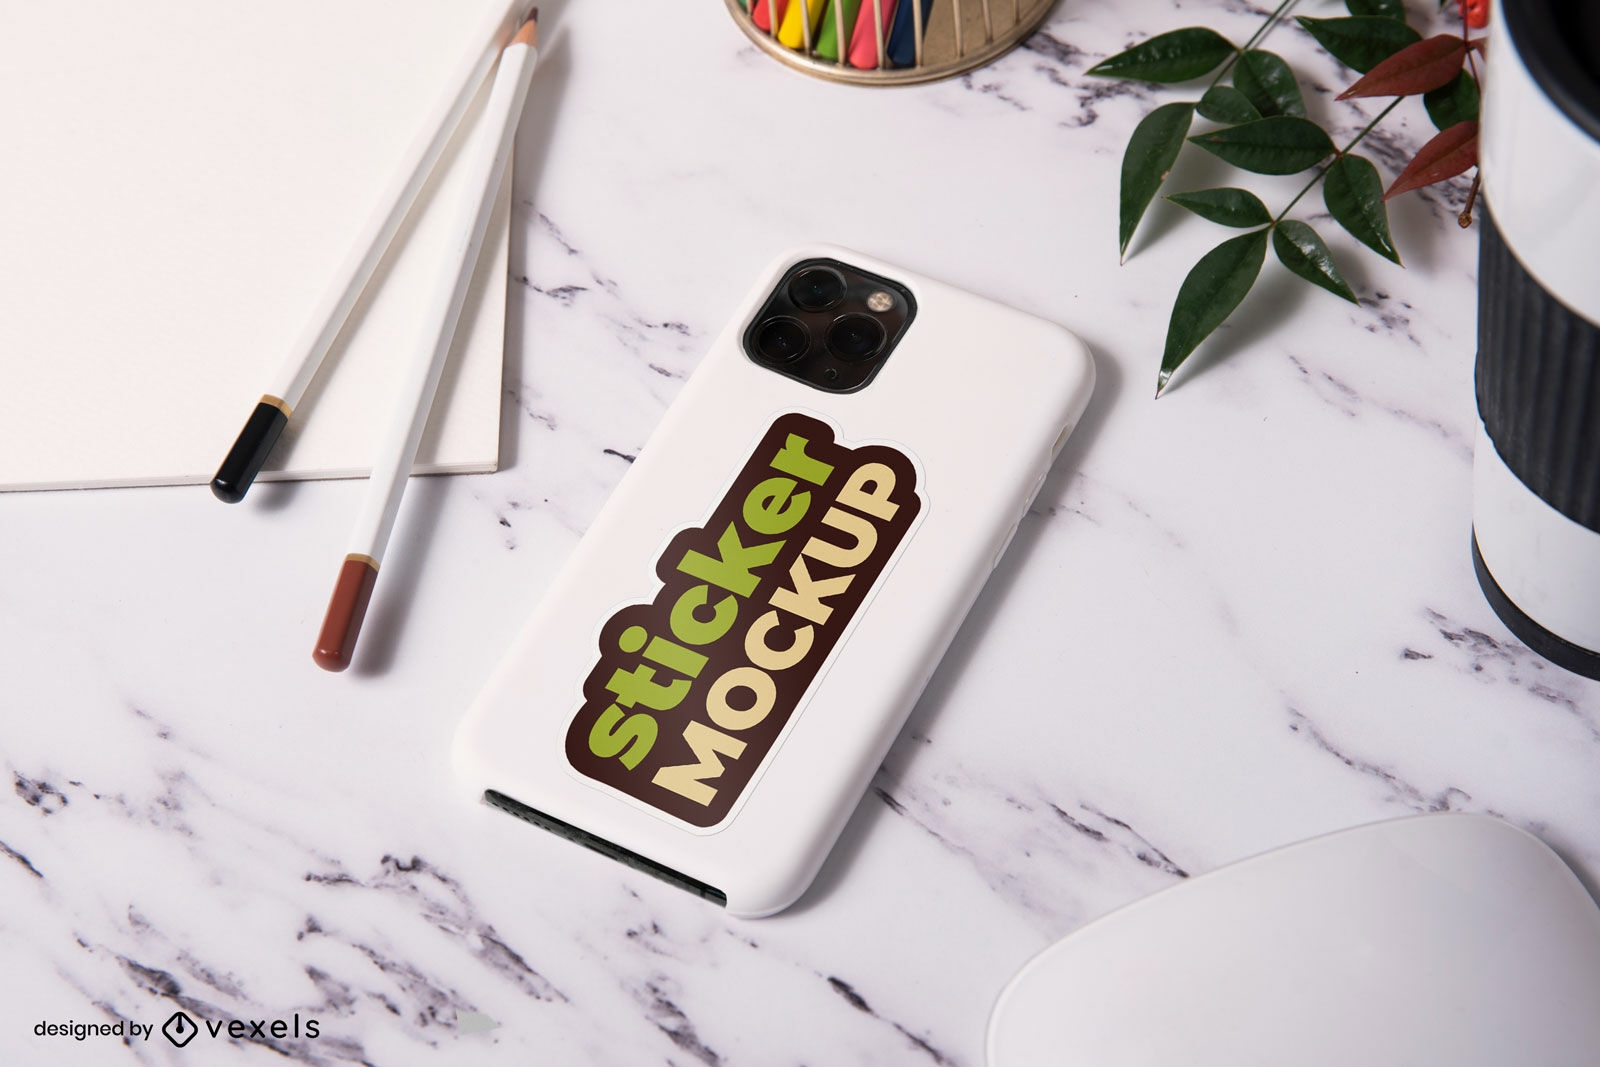 Sticker on cellphone over marble table mockup